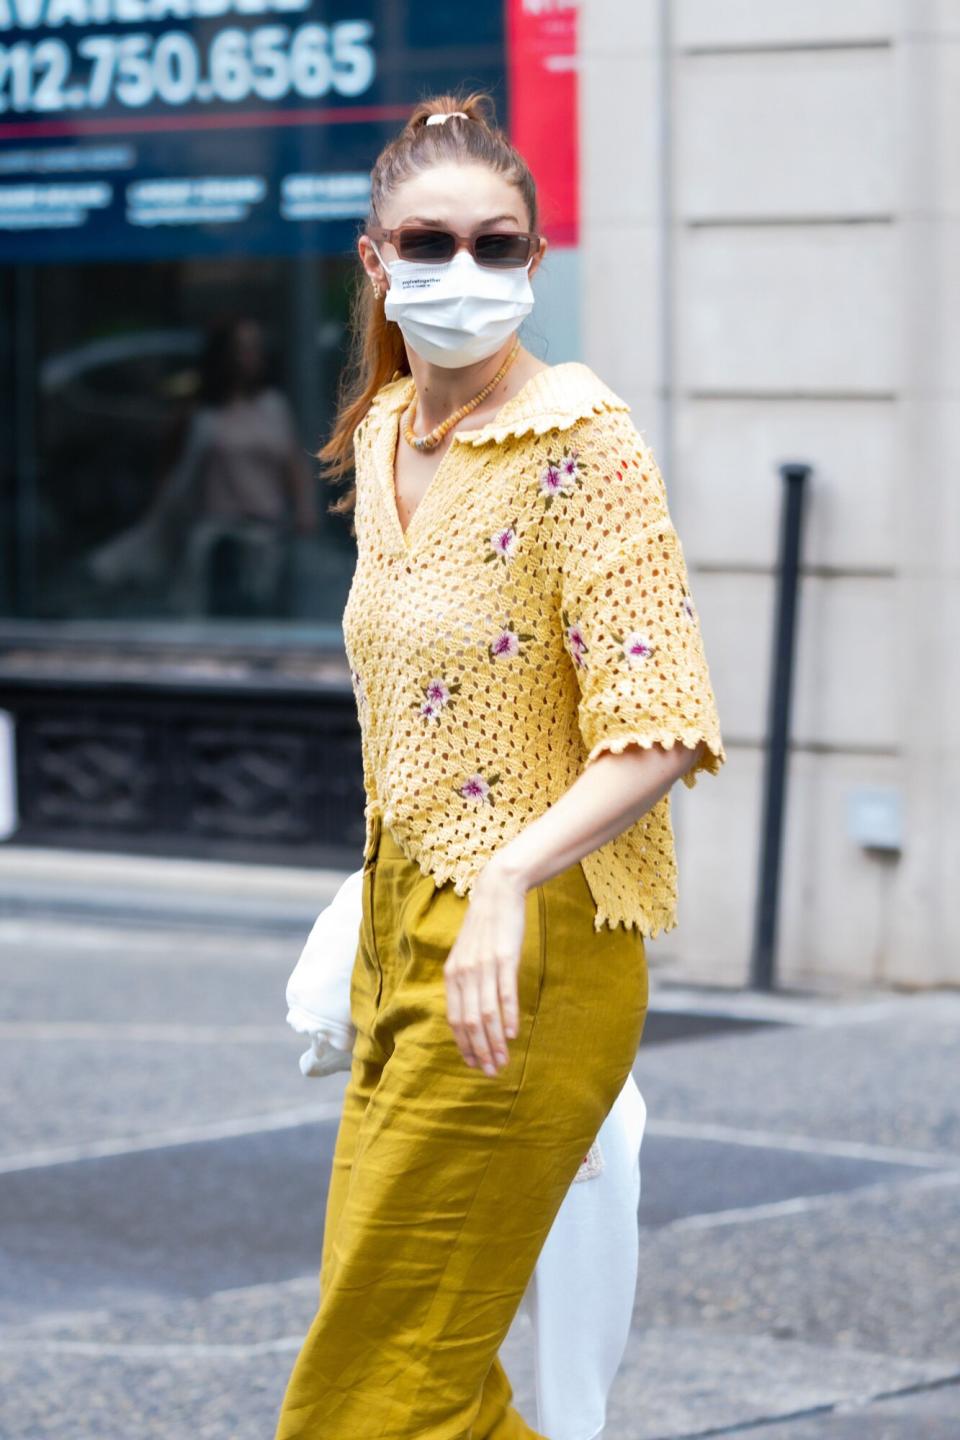 Practically Every Celeb Has This Face Mask, and I Finally Get Why